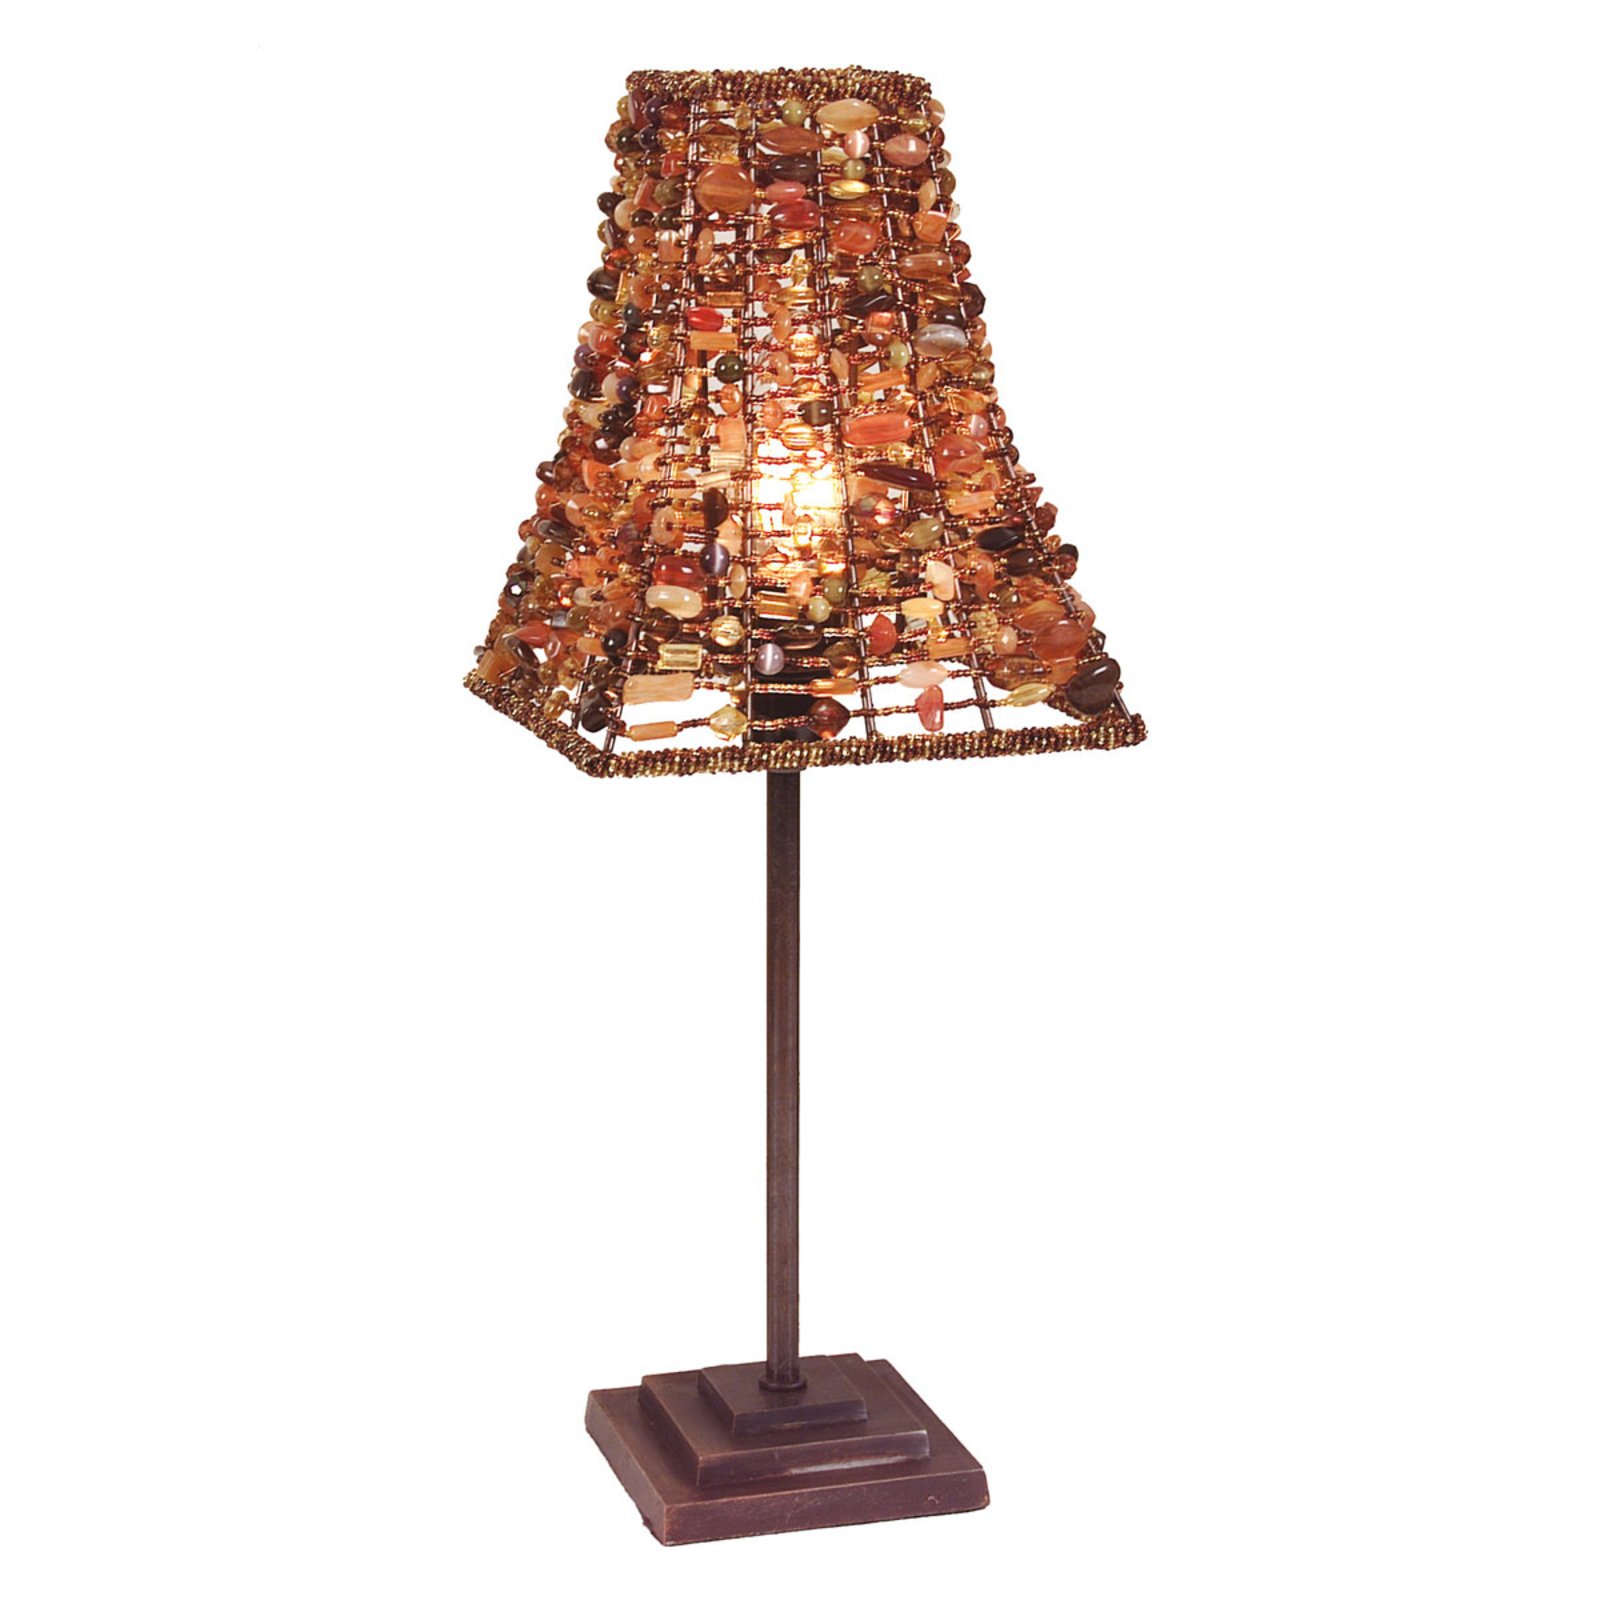 Bella table lamp with a square lampshade/foot